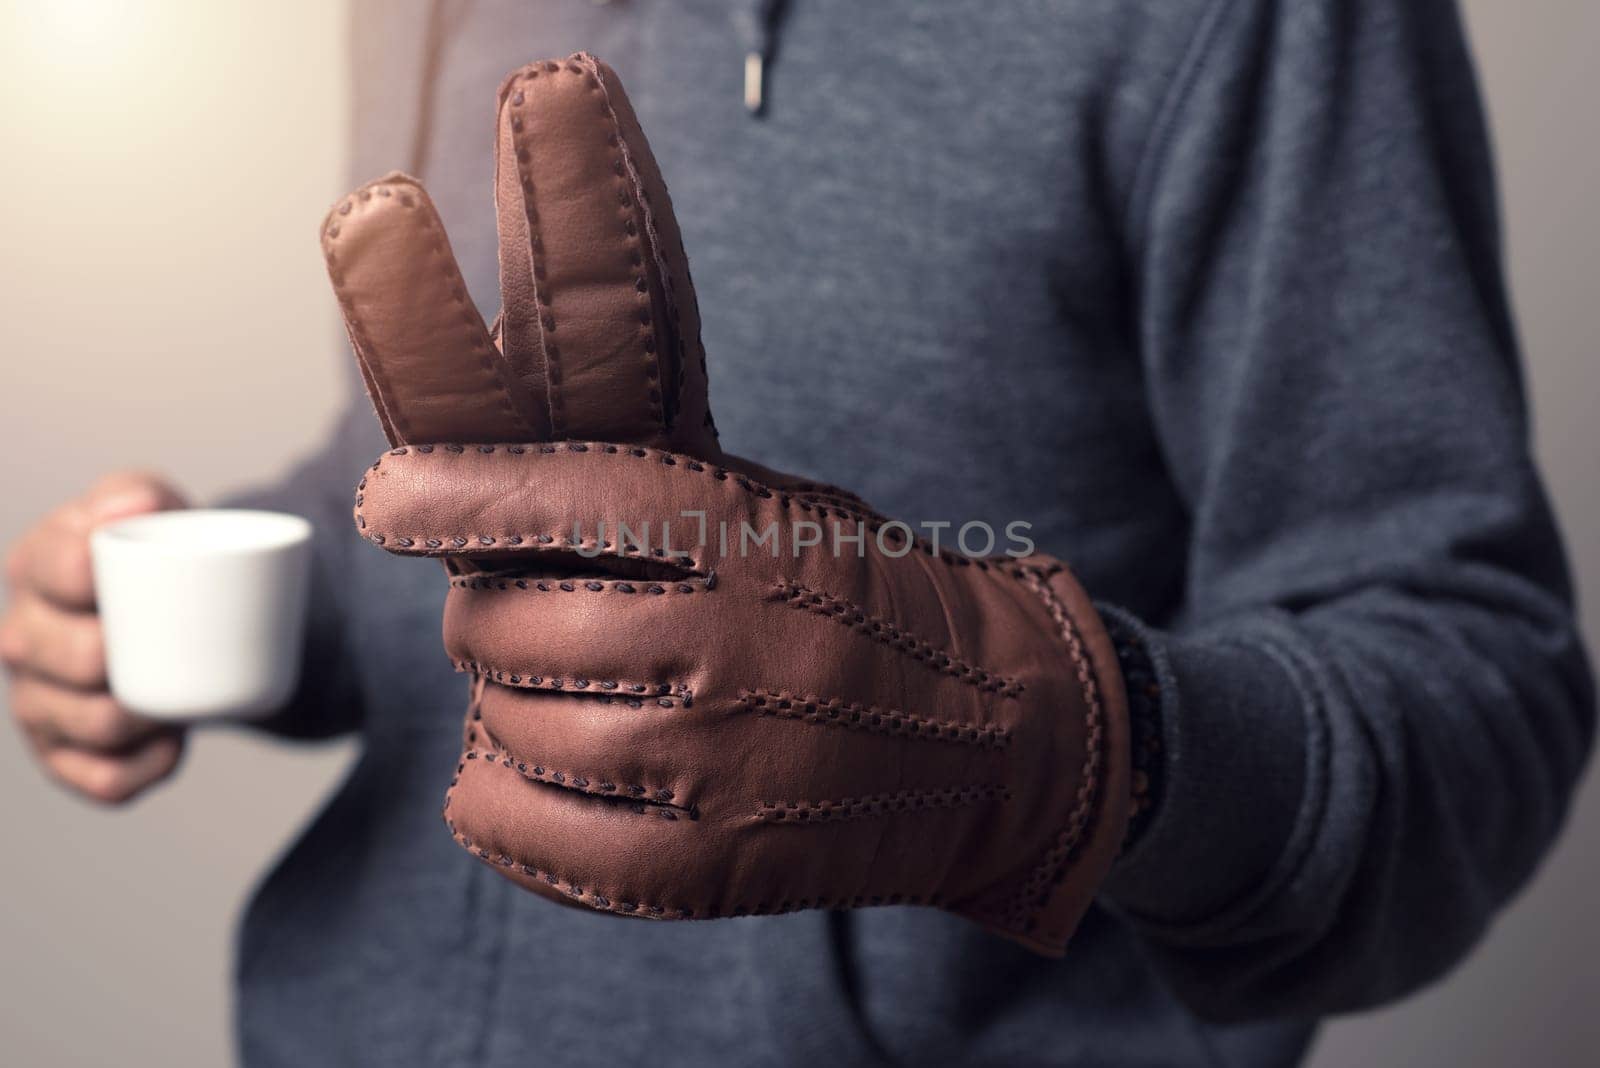 wearing the gloves by norgal